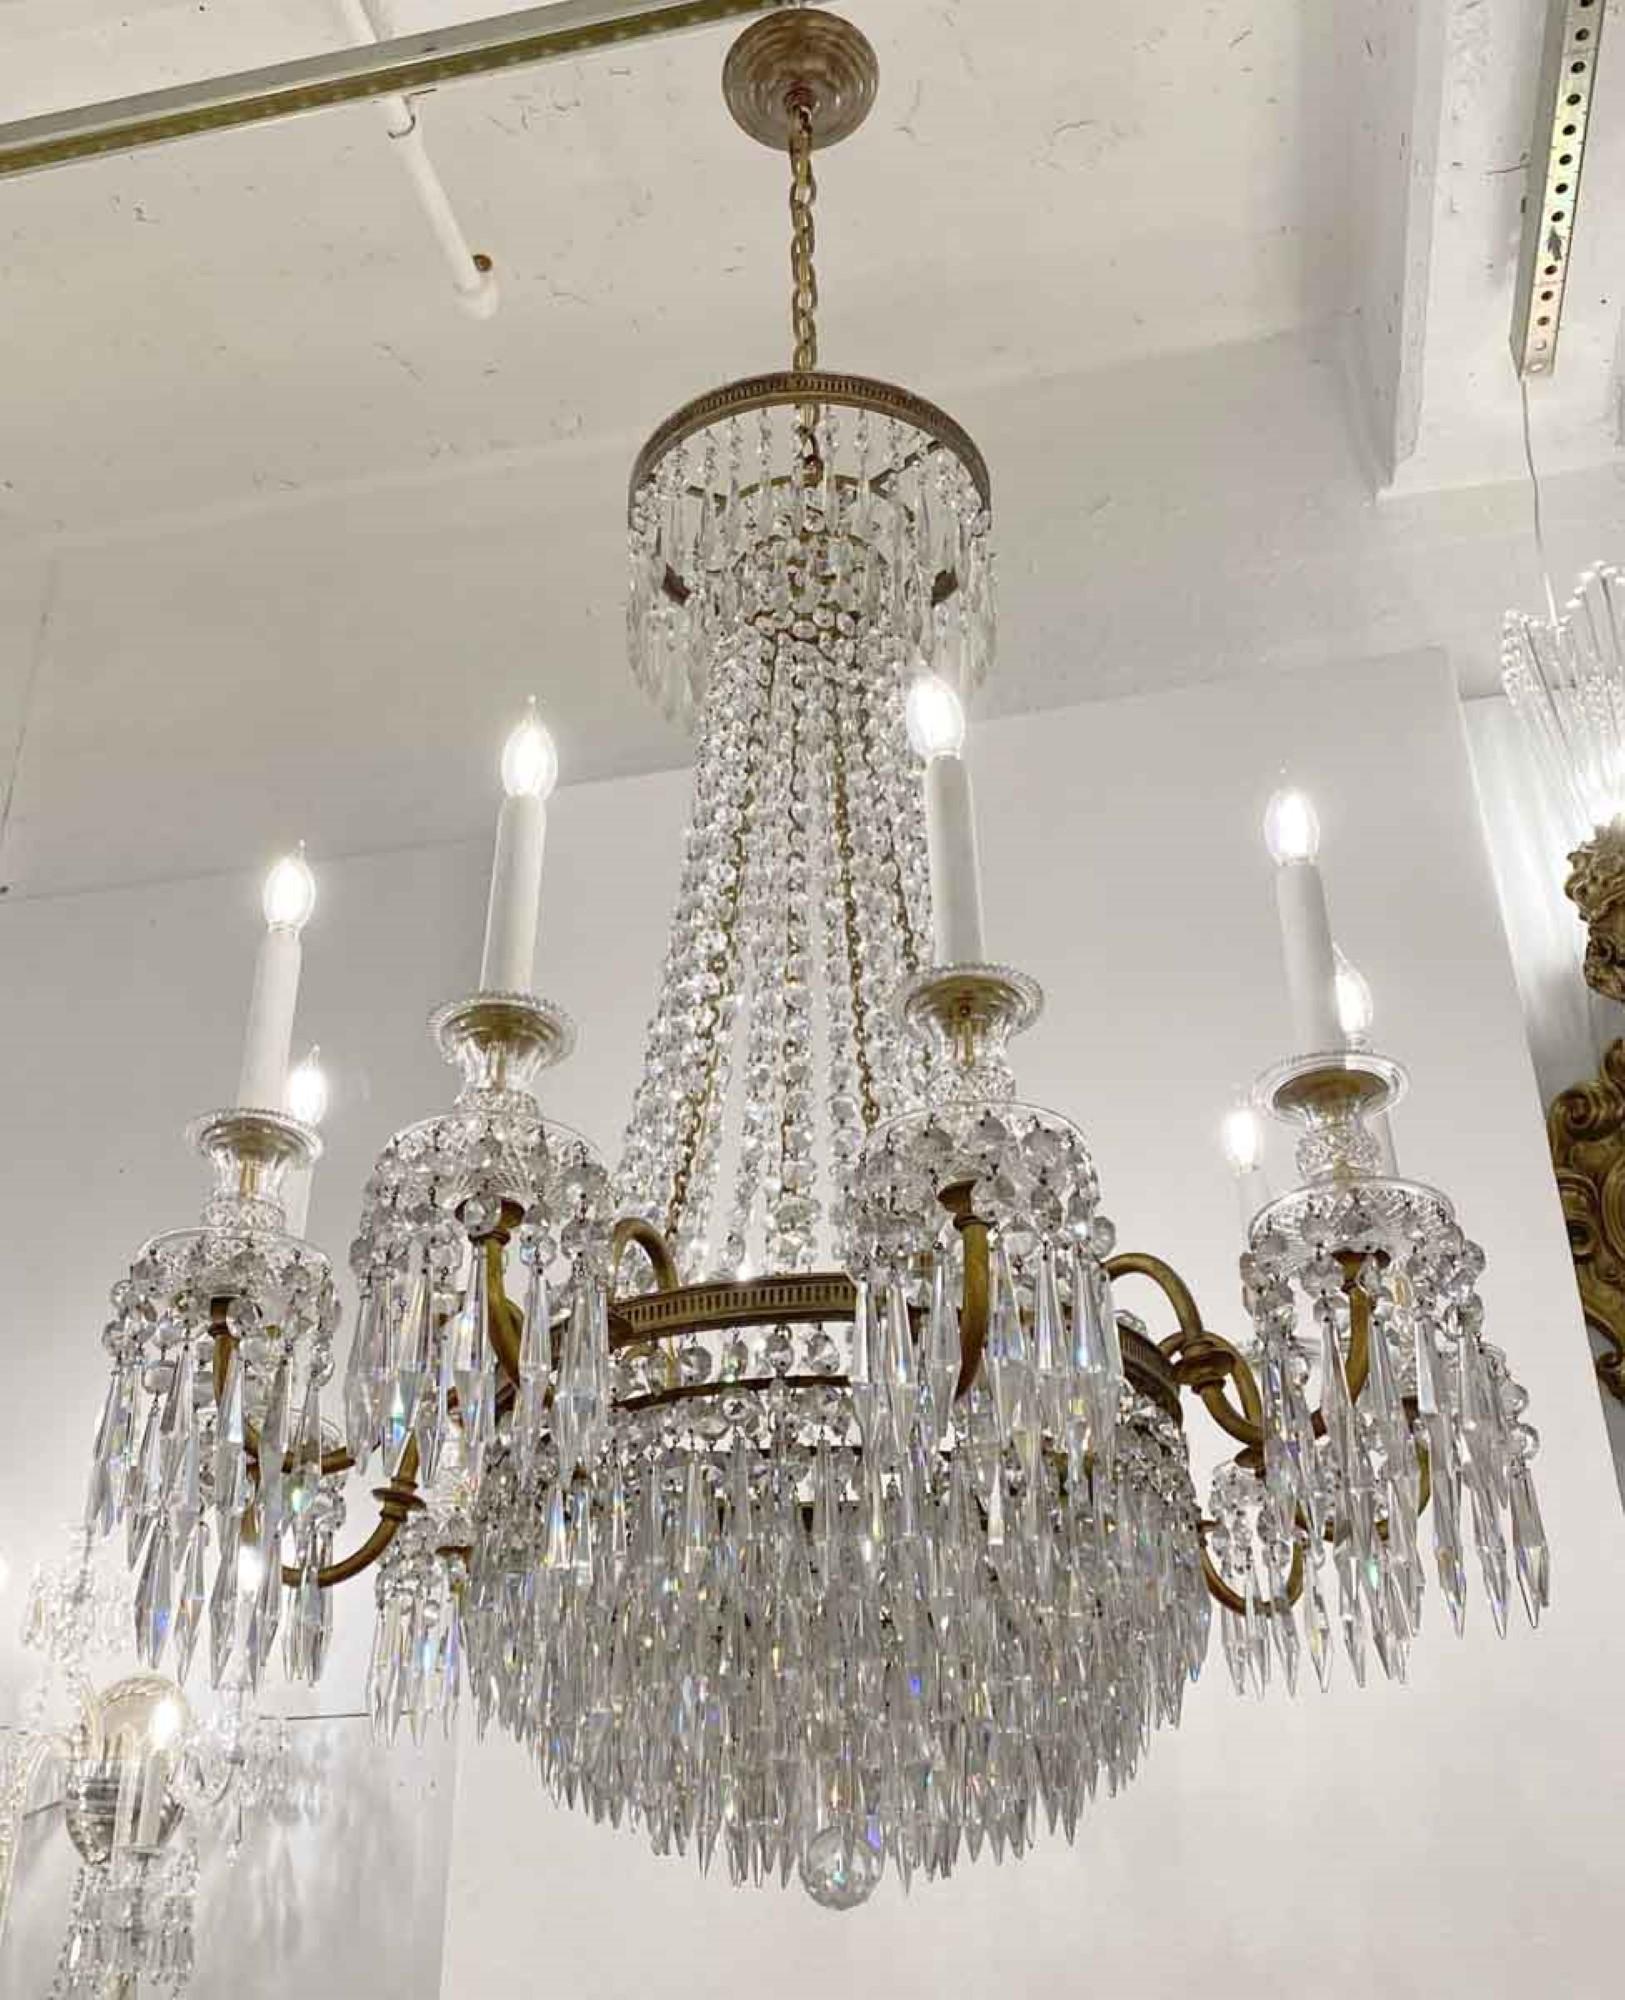 Early 20th Century 1920s French Regency Crystal and Bronze Chandelier Antique with Hand Cut Crystal For Sale